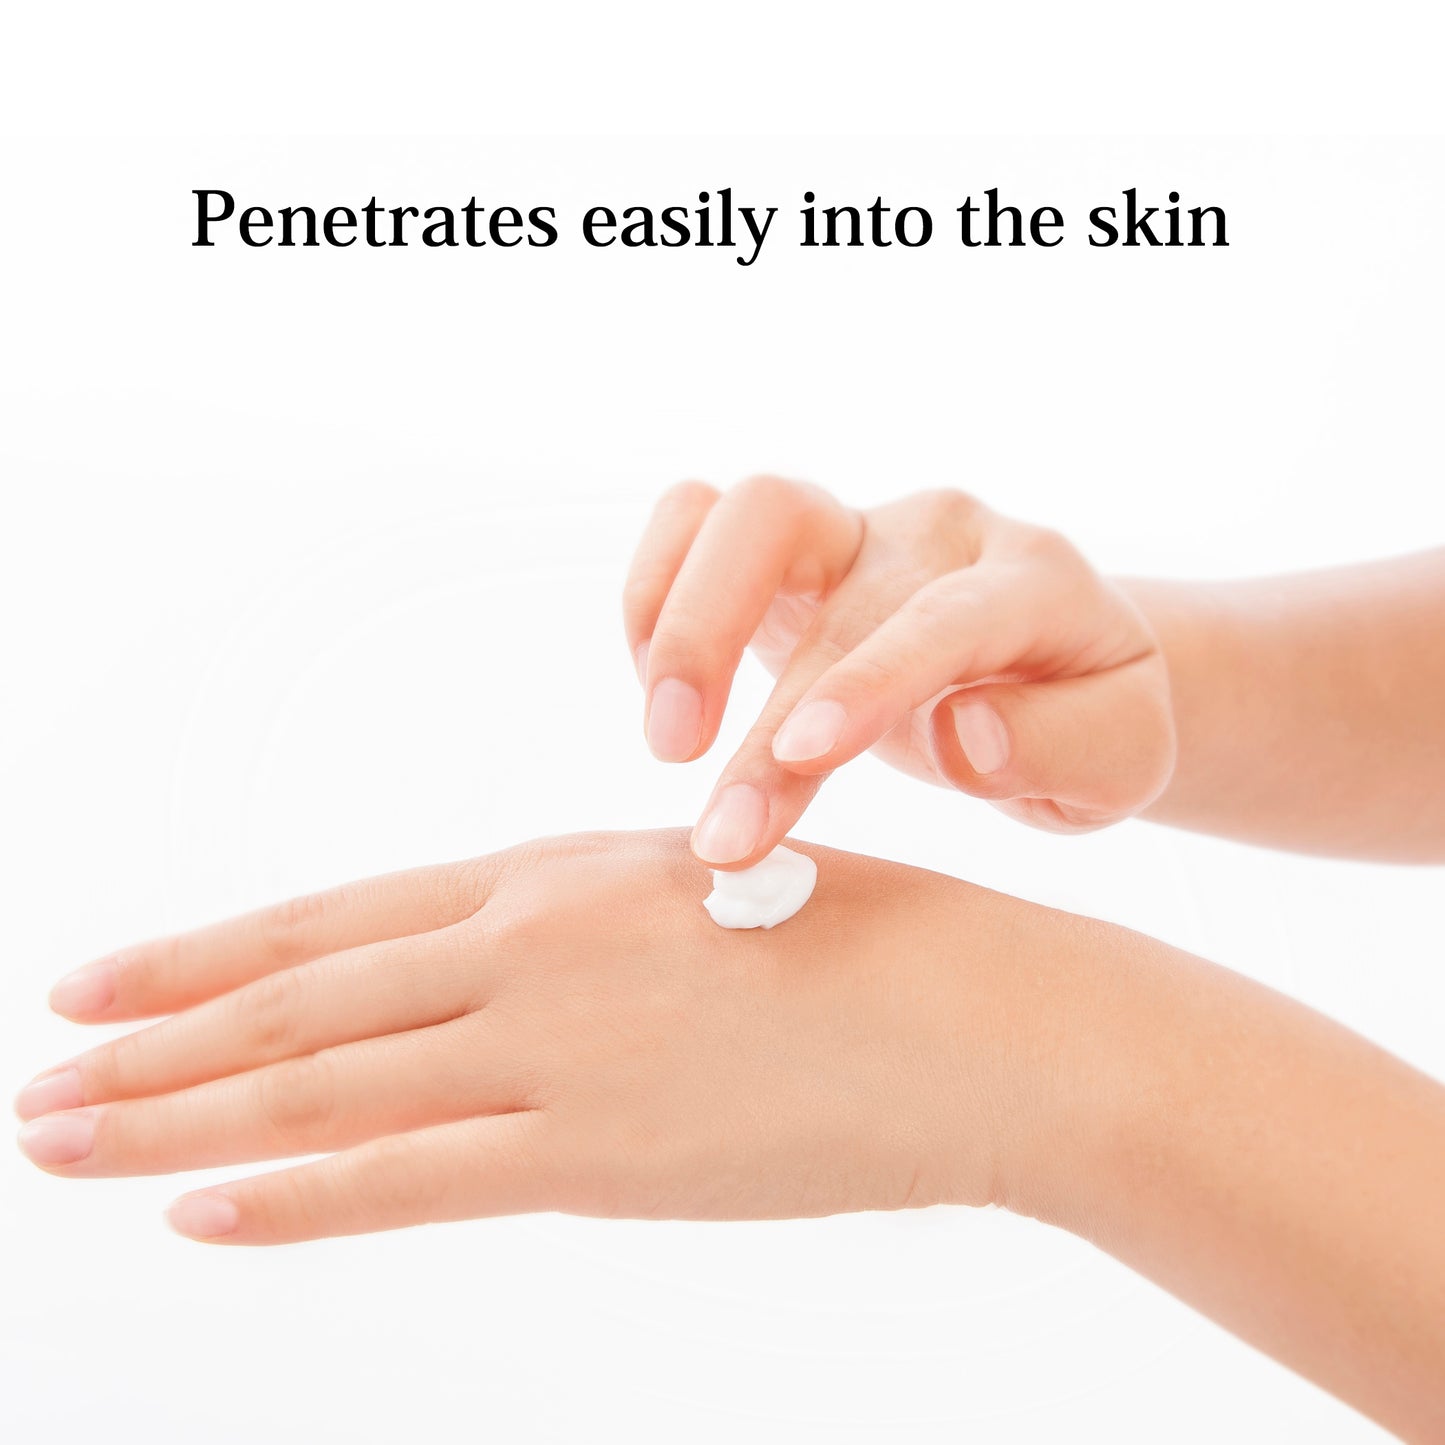 Penetrates easily into the skin